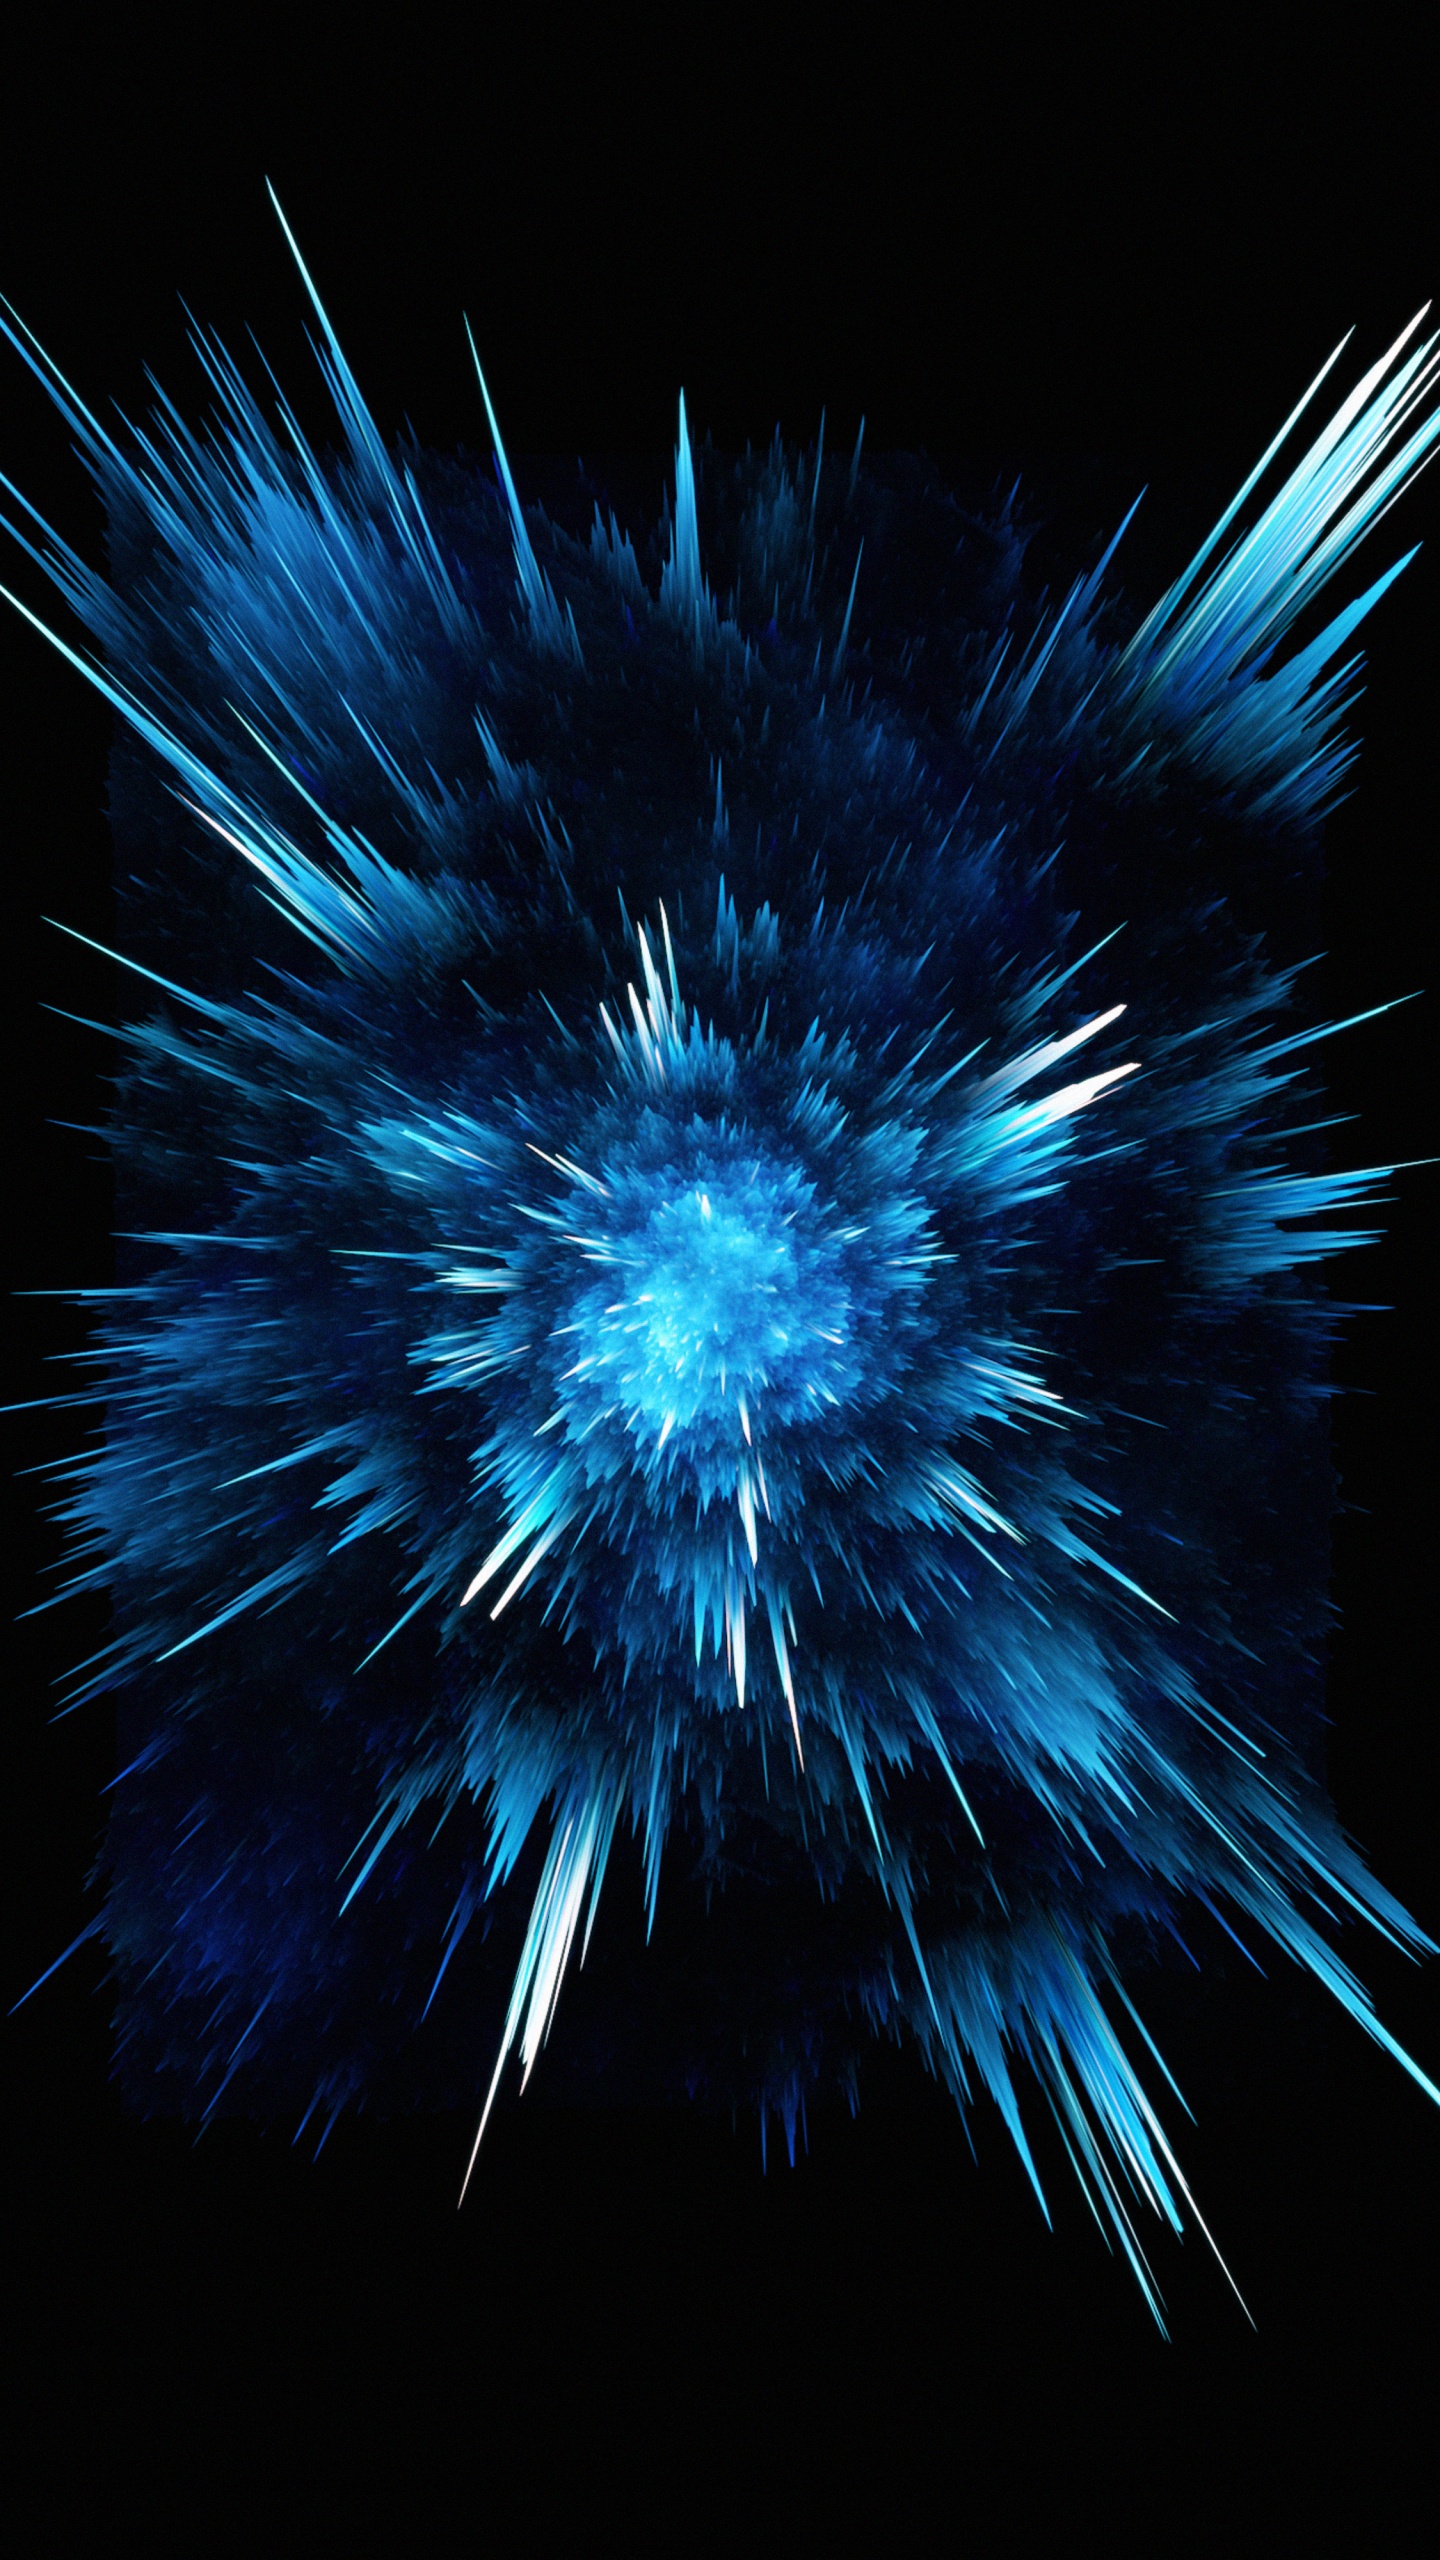 Blue and White Light on Black Background. Wallpaper in 1440x2560 Resolution